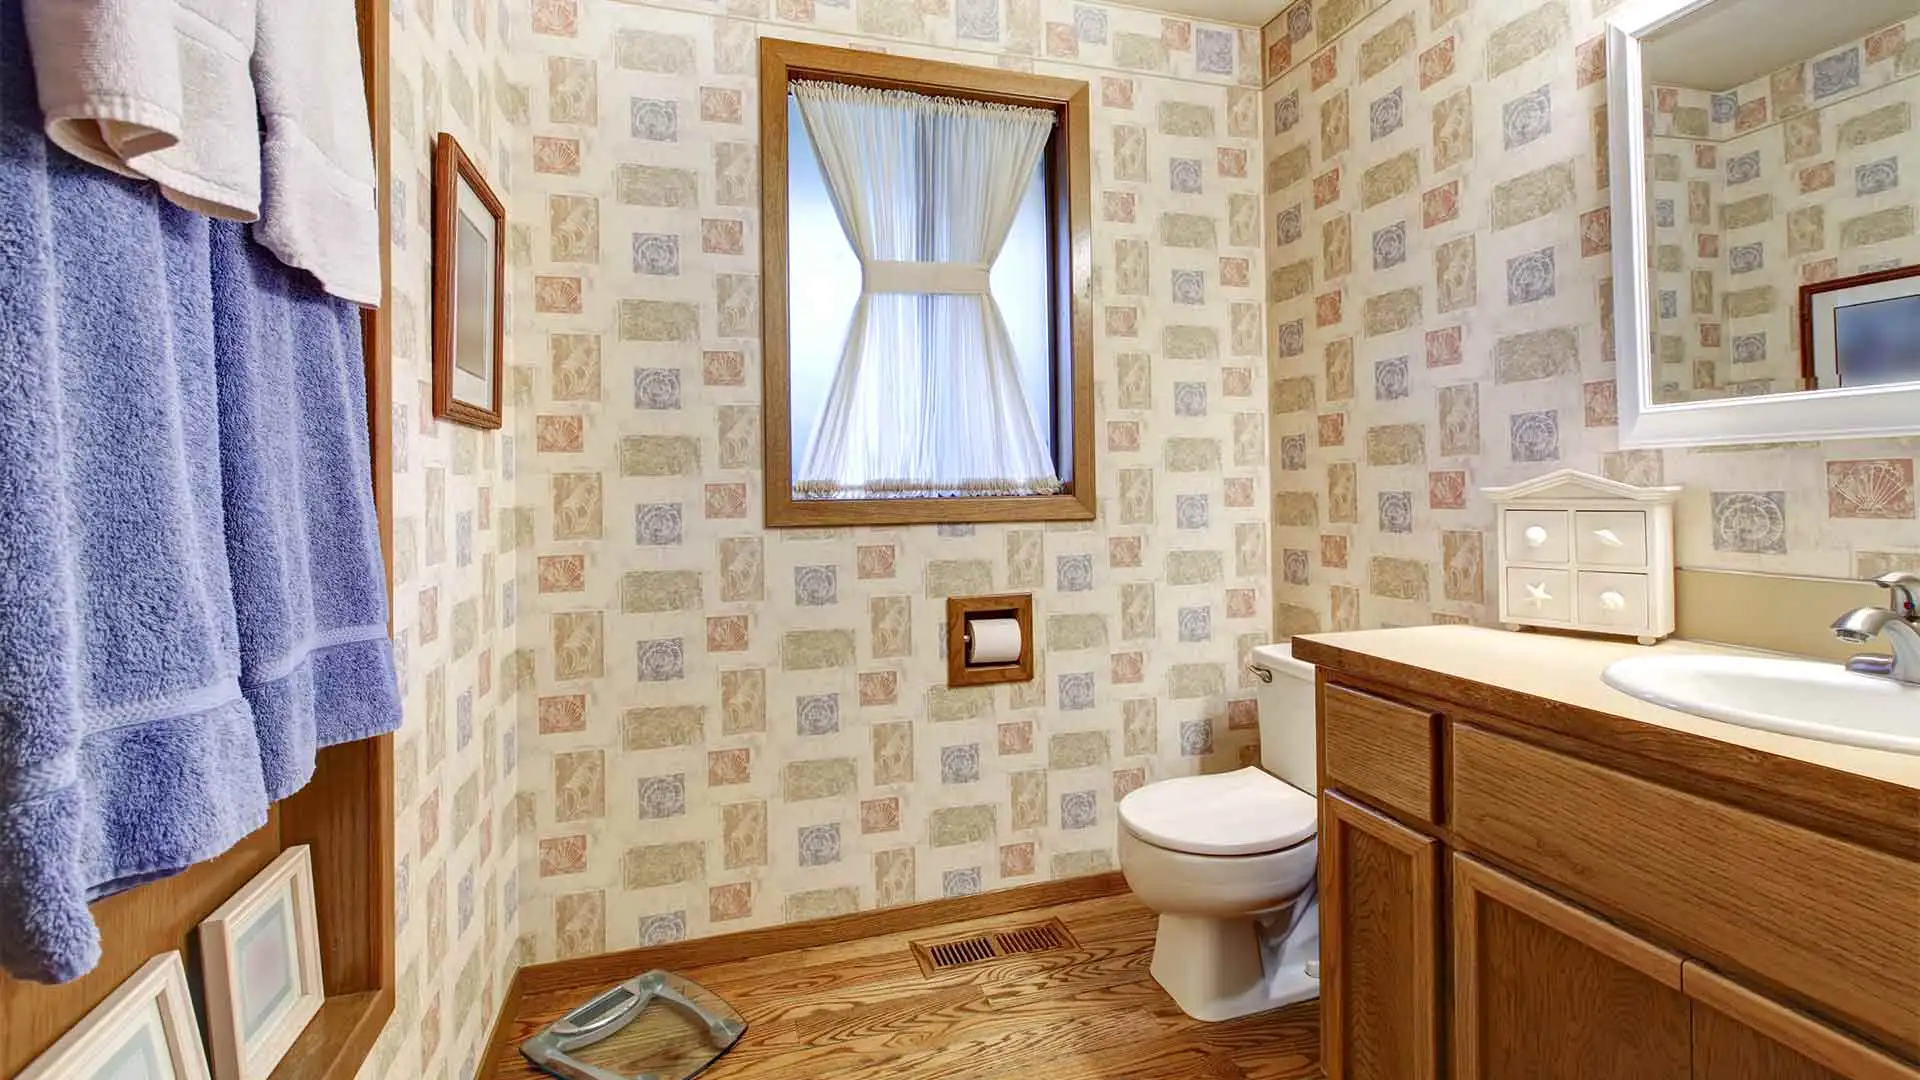 5 Reasons to Remodel Your Small Bathroom